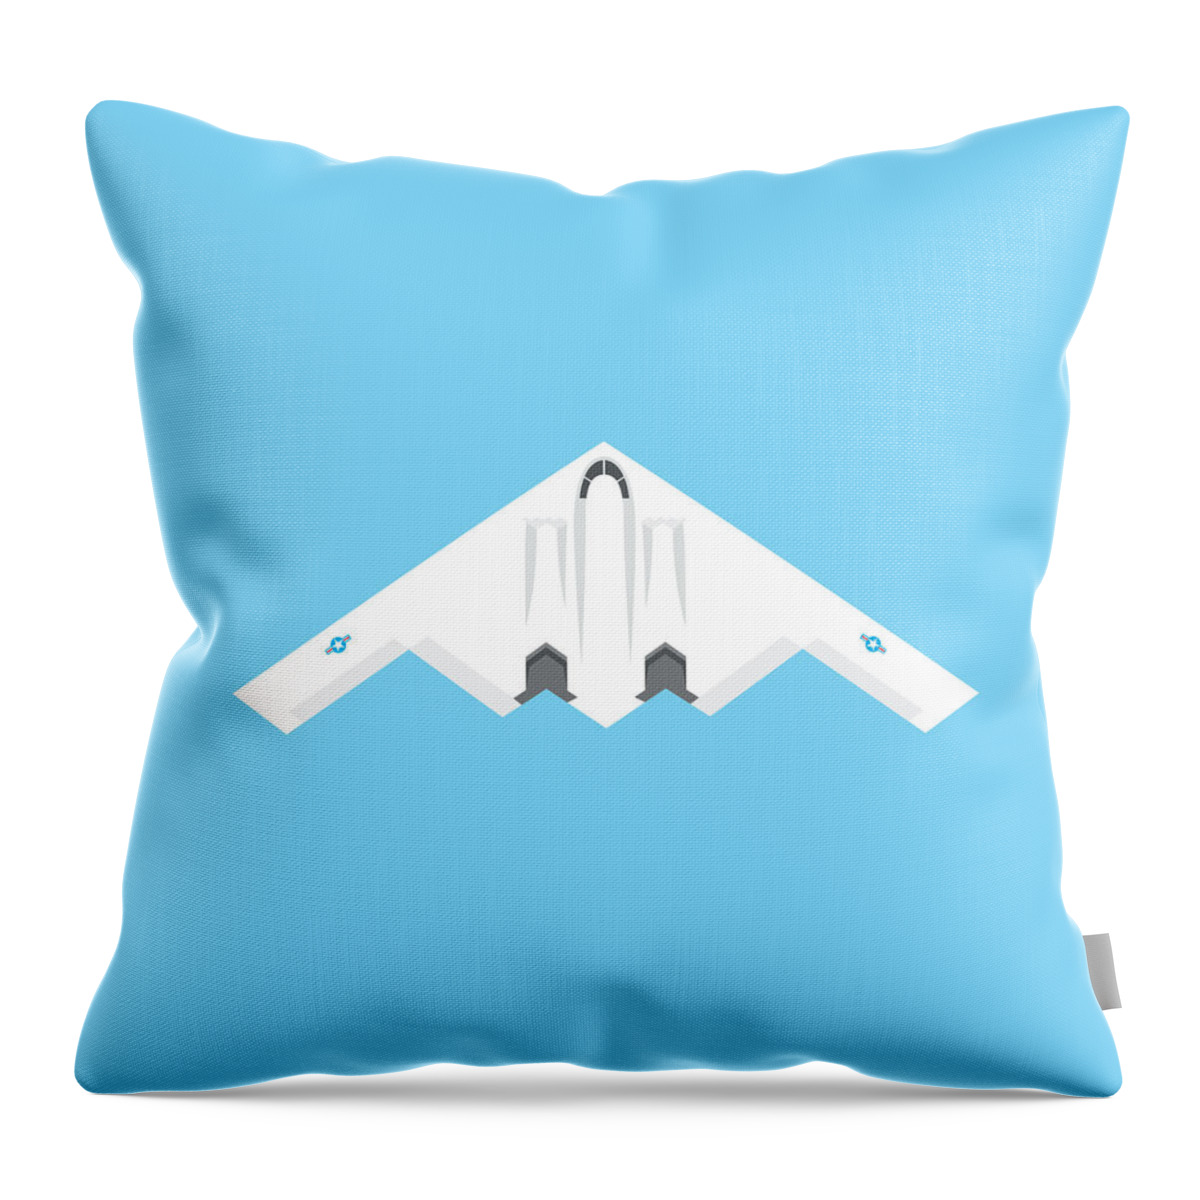 Aviation Throw Pillow featuring the digital art B2 Stealth Bomber Jet Aircraft - Sky by Organic Synthesis